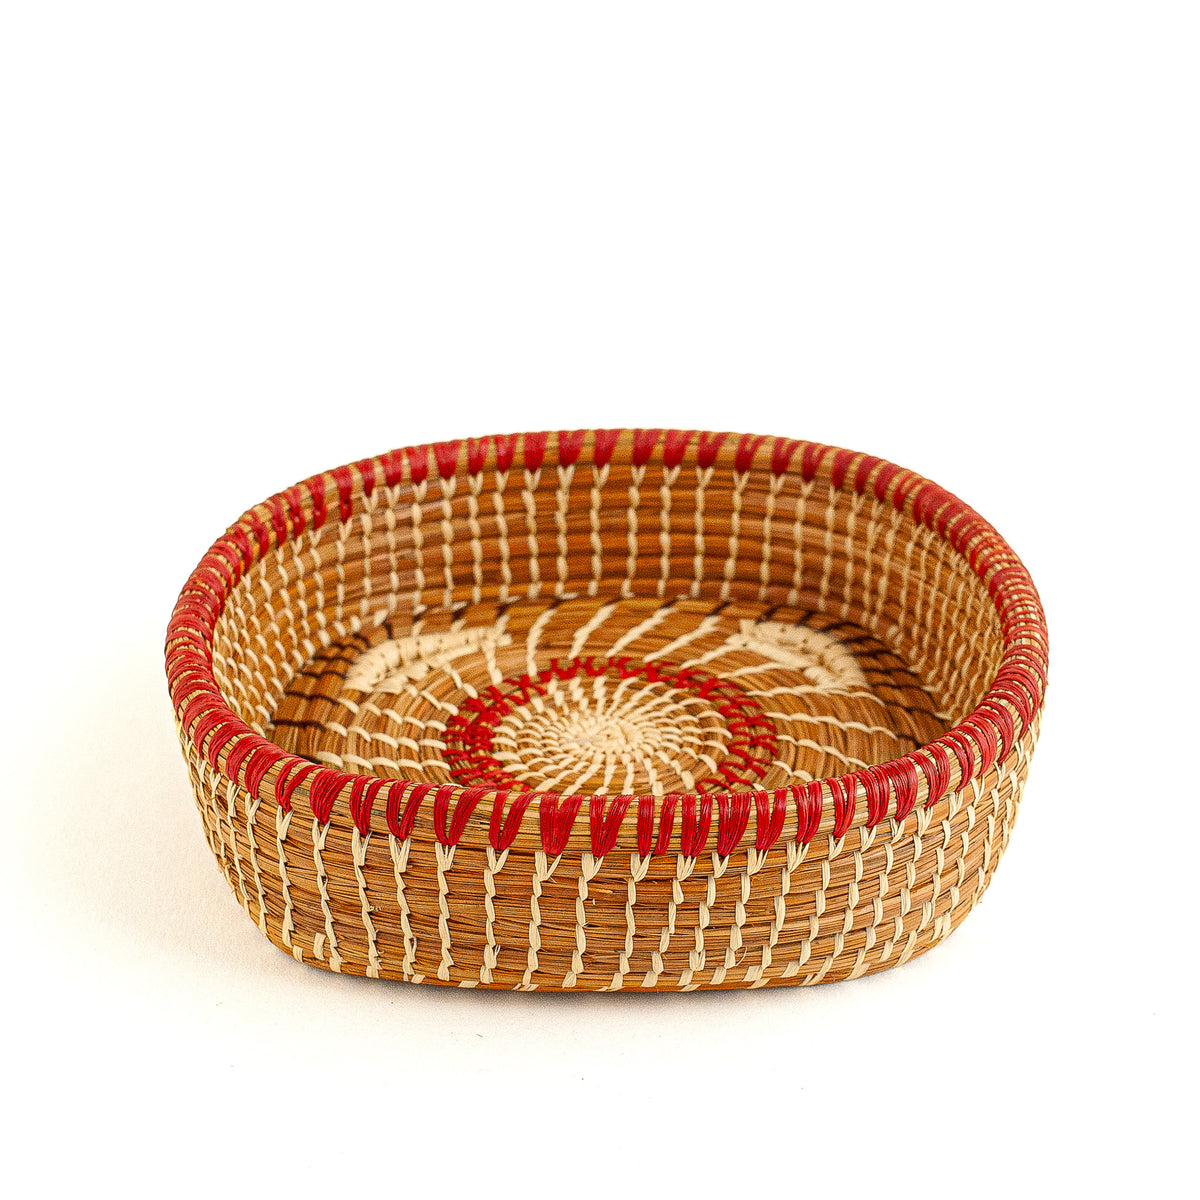 pine needle basket with red and brown accents